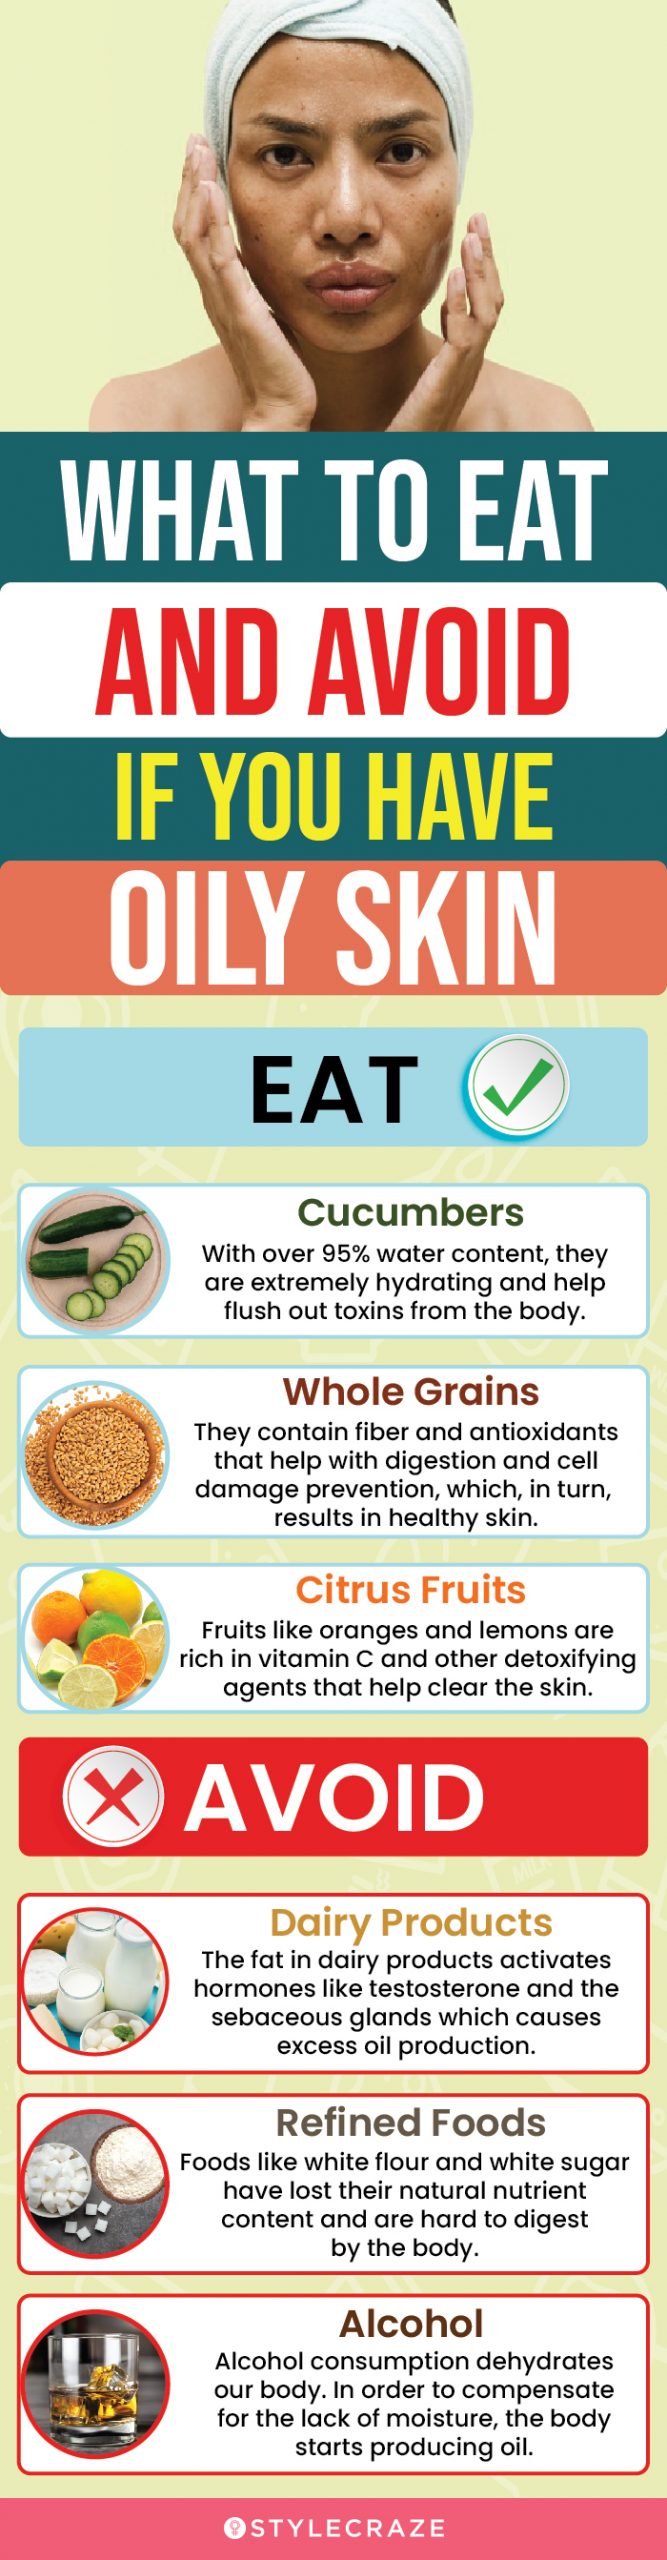 what to eat and avoid if you have oily skin [infographic]